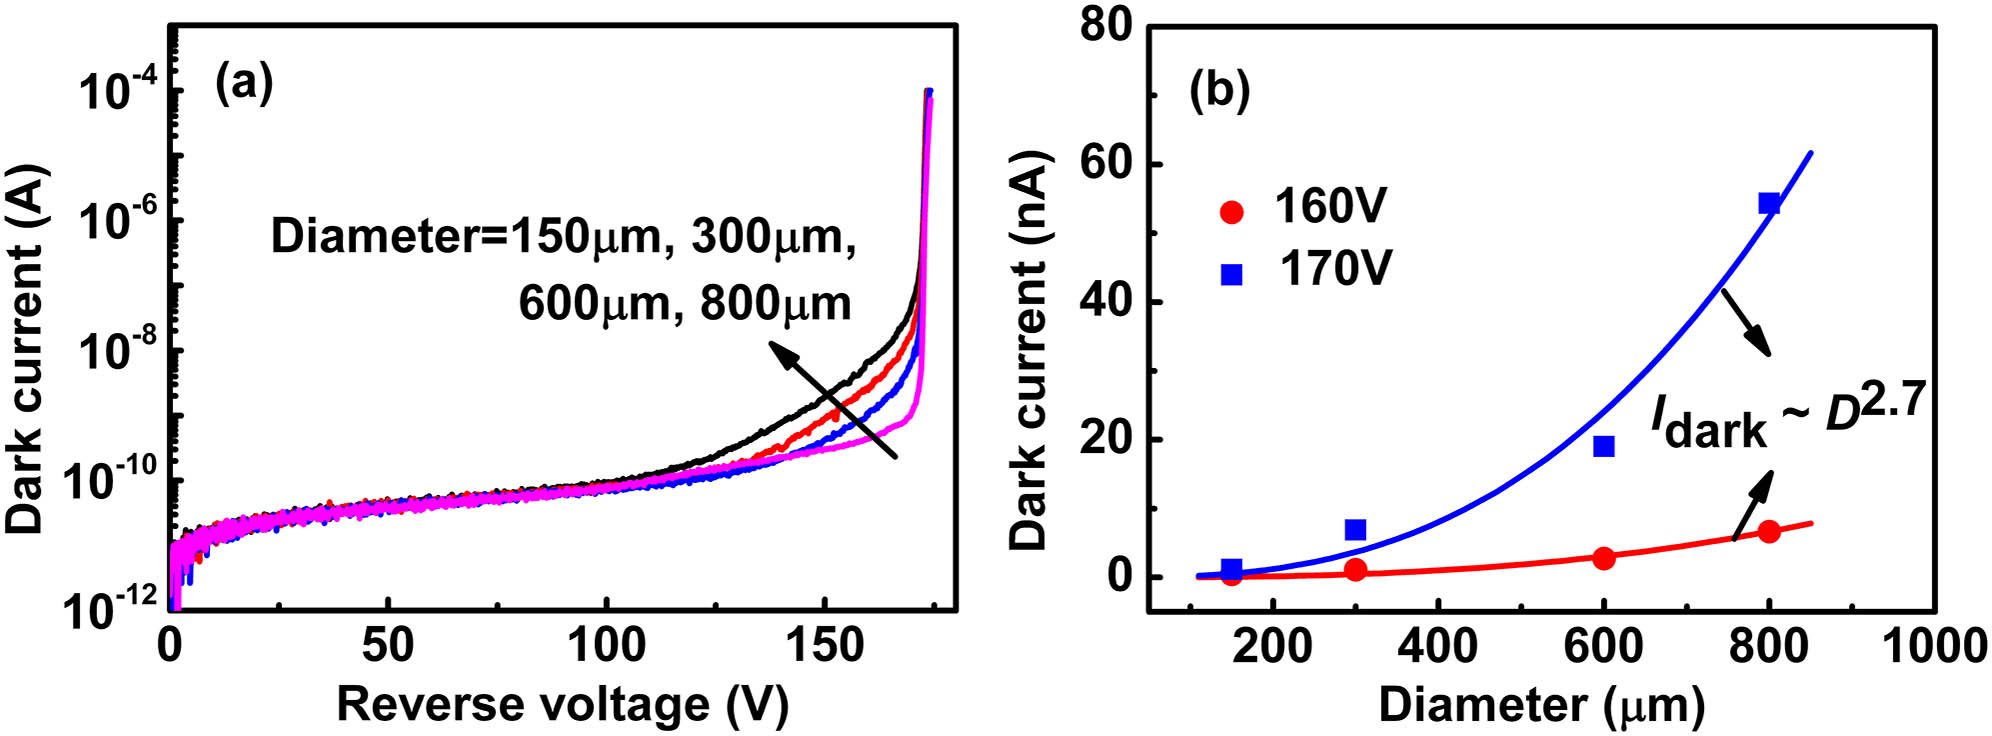 (a) Dark current of fabricated APDs with various sizes; (b) dark current as a function of device diameter at the reverse voltages of 160 V and 170 V.